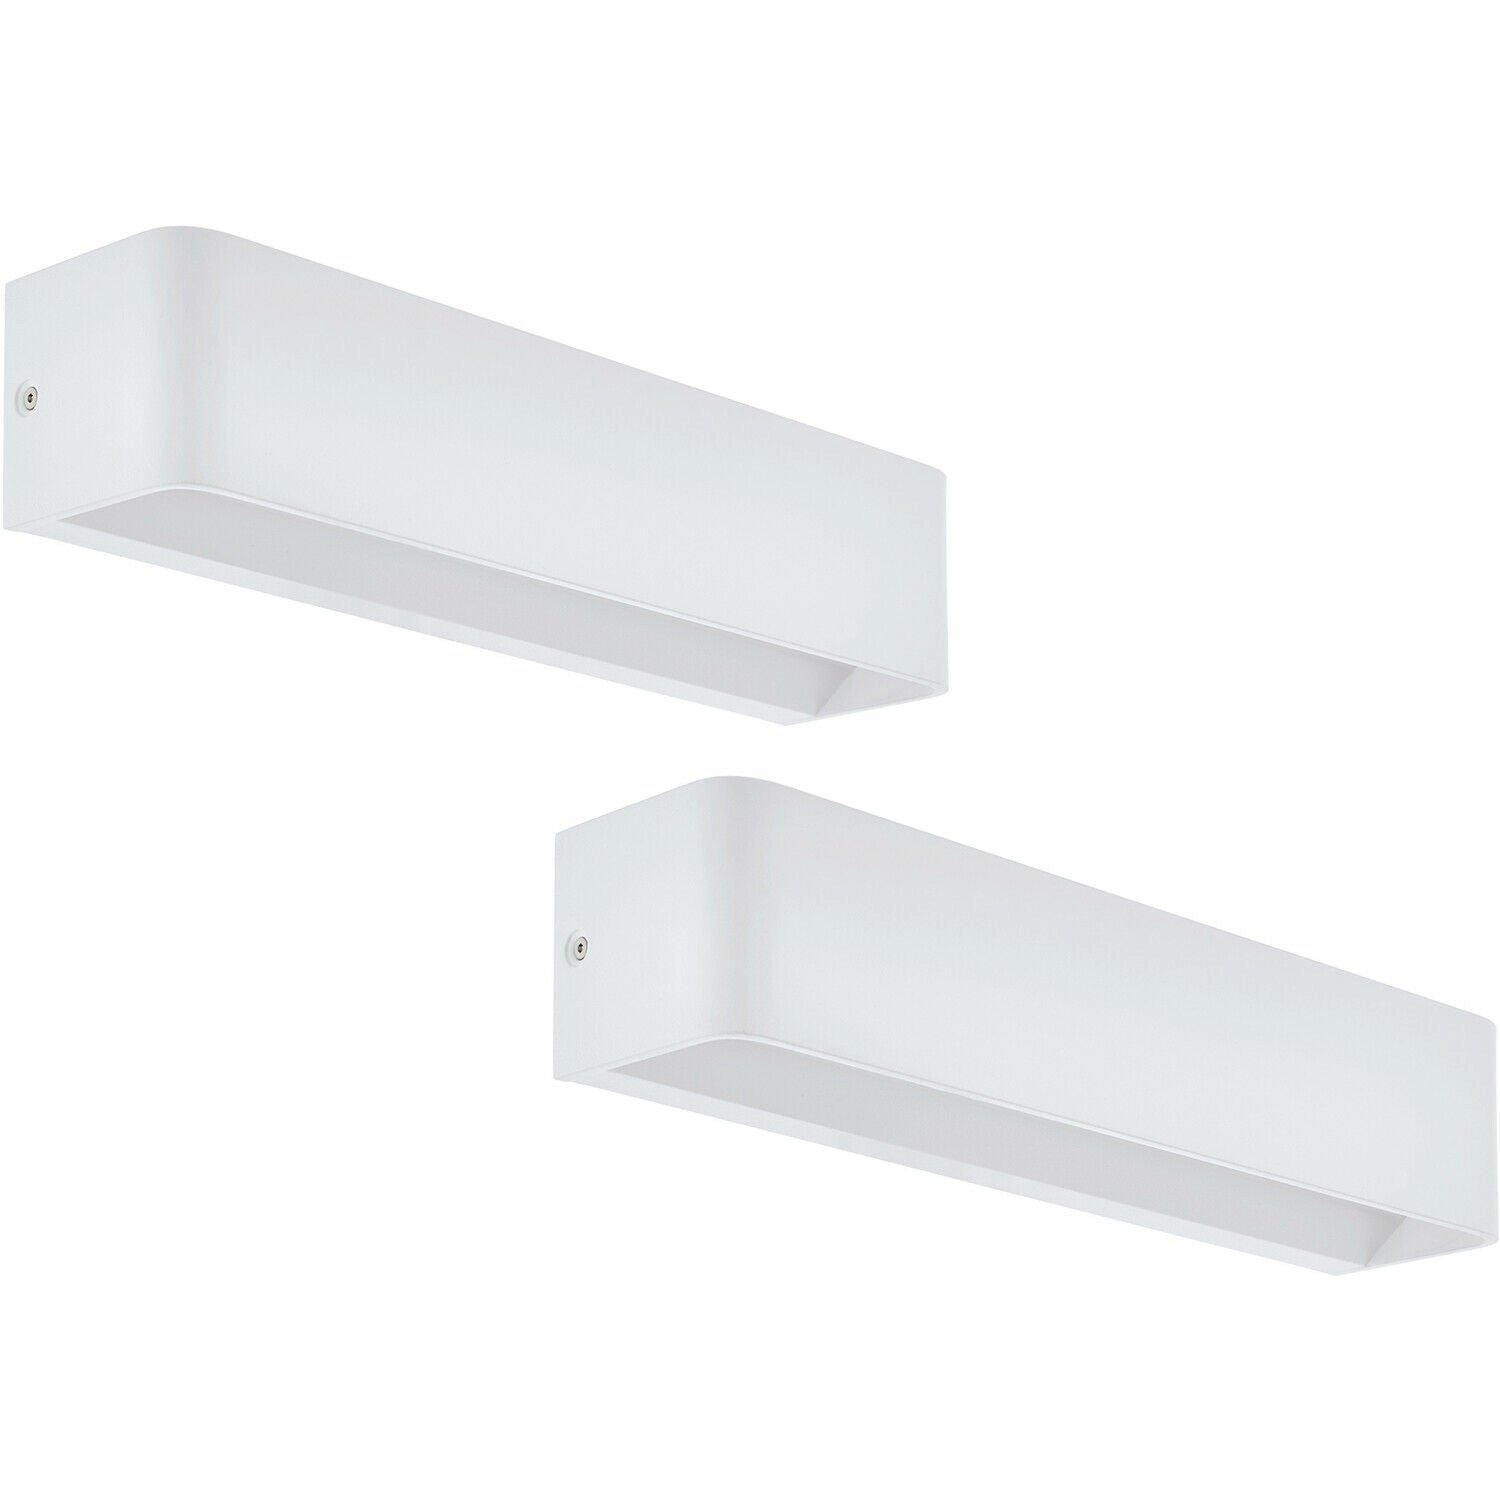 2 PACK Wall Light Colour White Oblong Box Shape Snug Fitting LED 12W Included - image 1